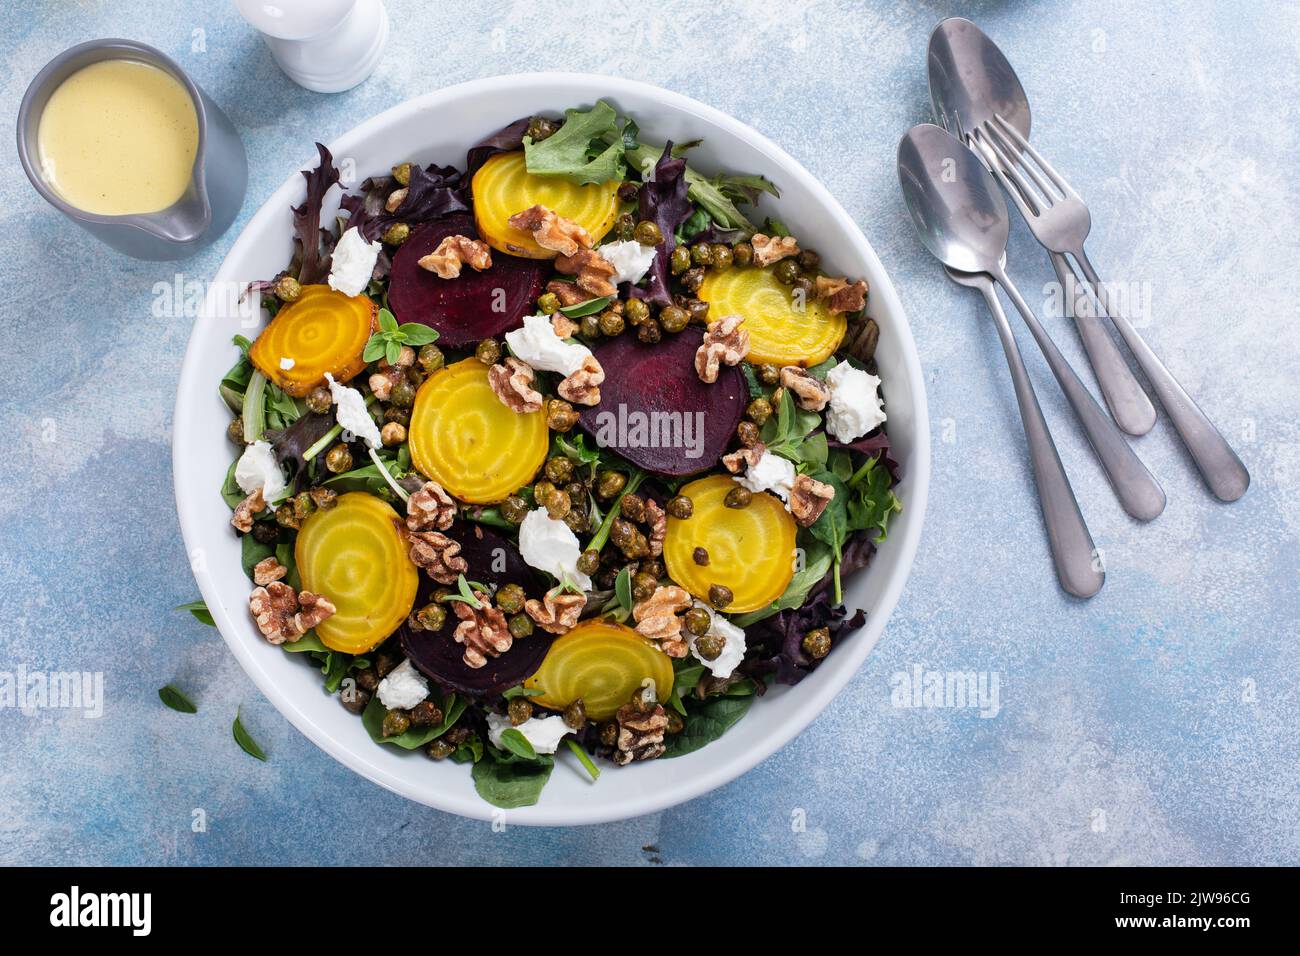 Beet and goat cheese salad with orange dressing Stock Photo